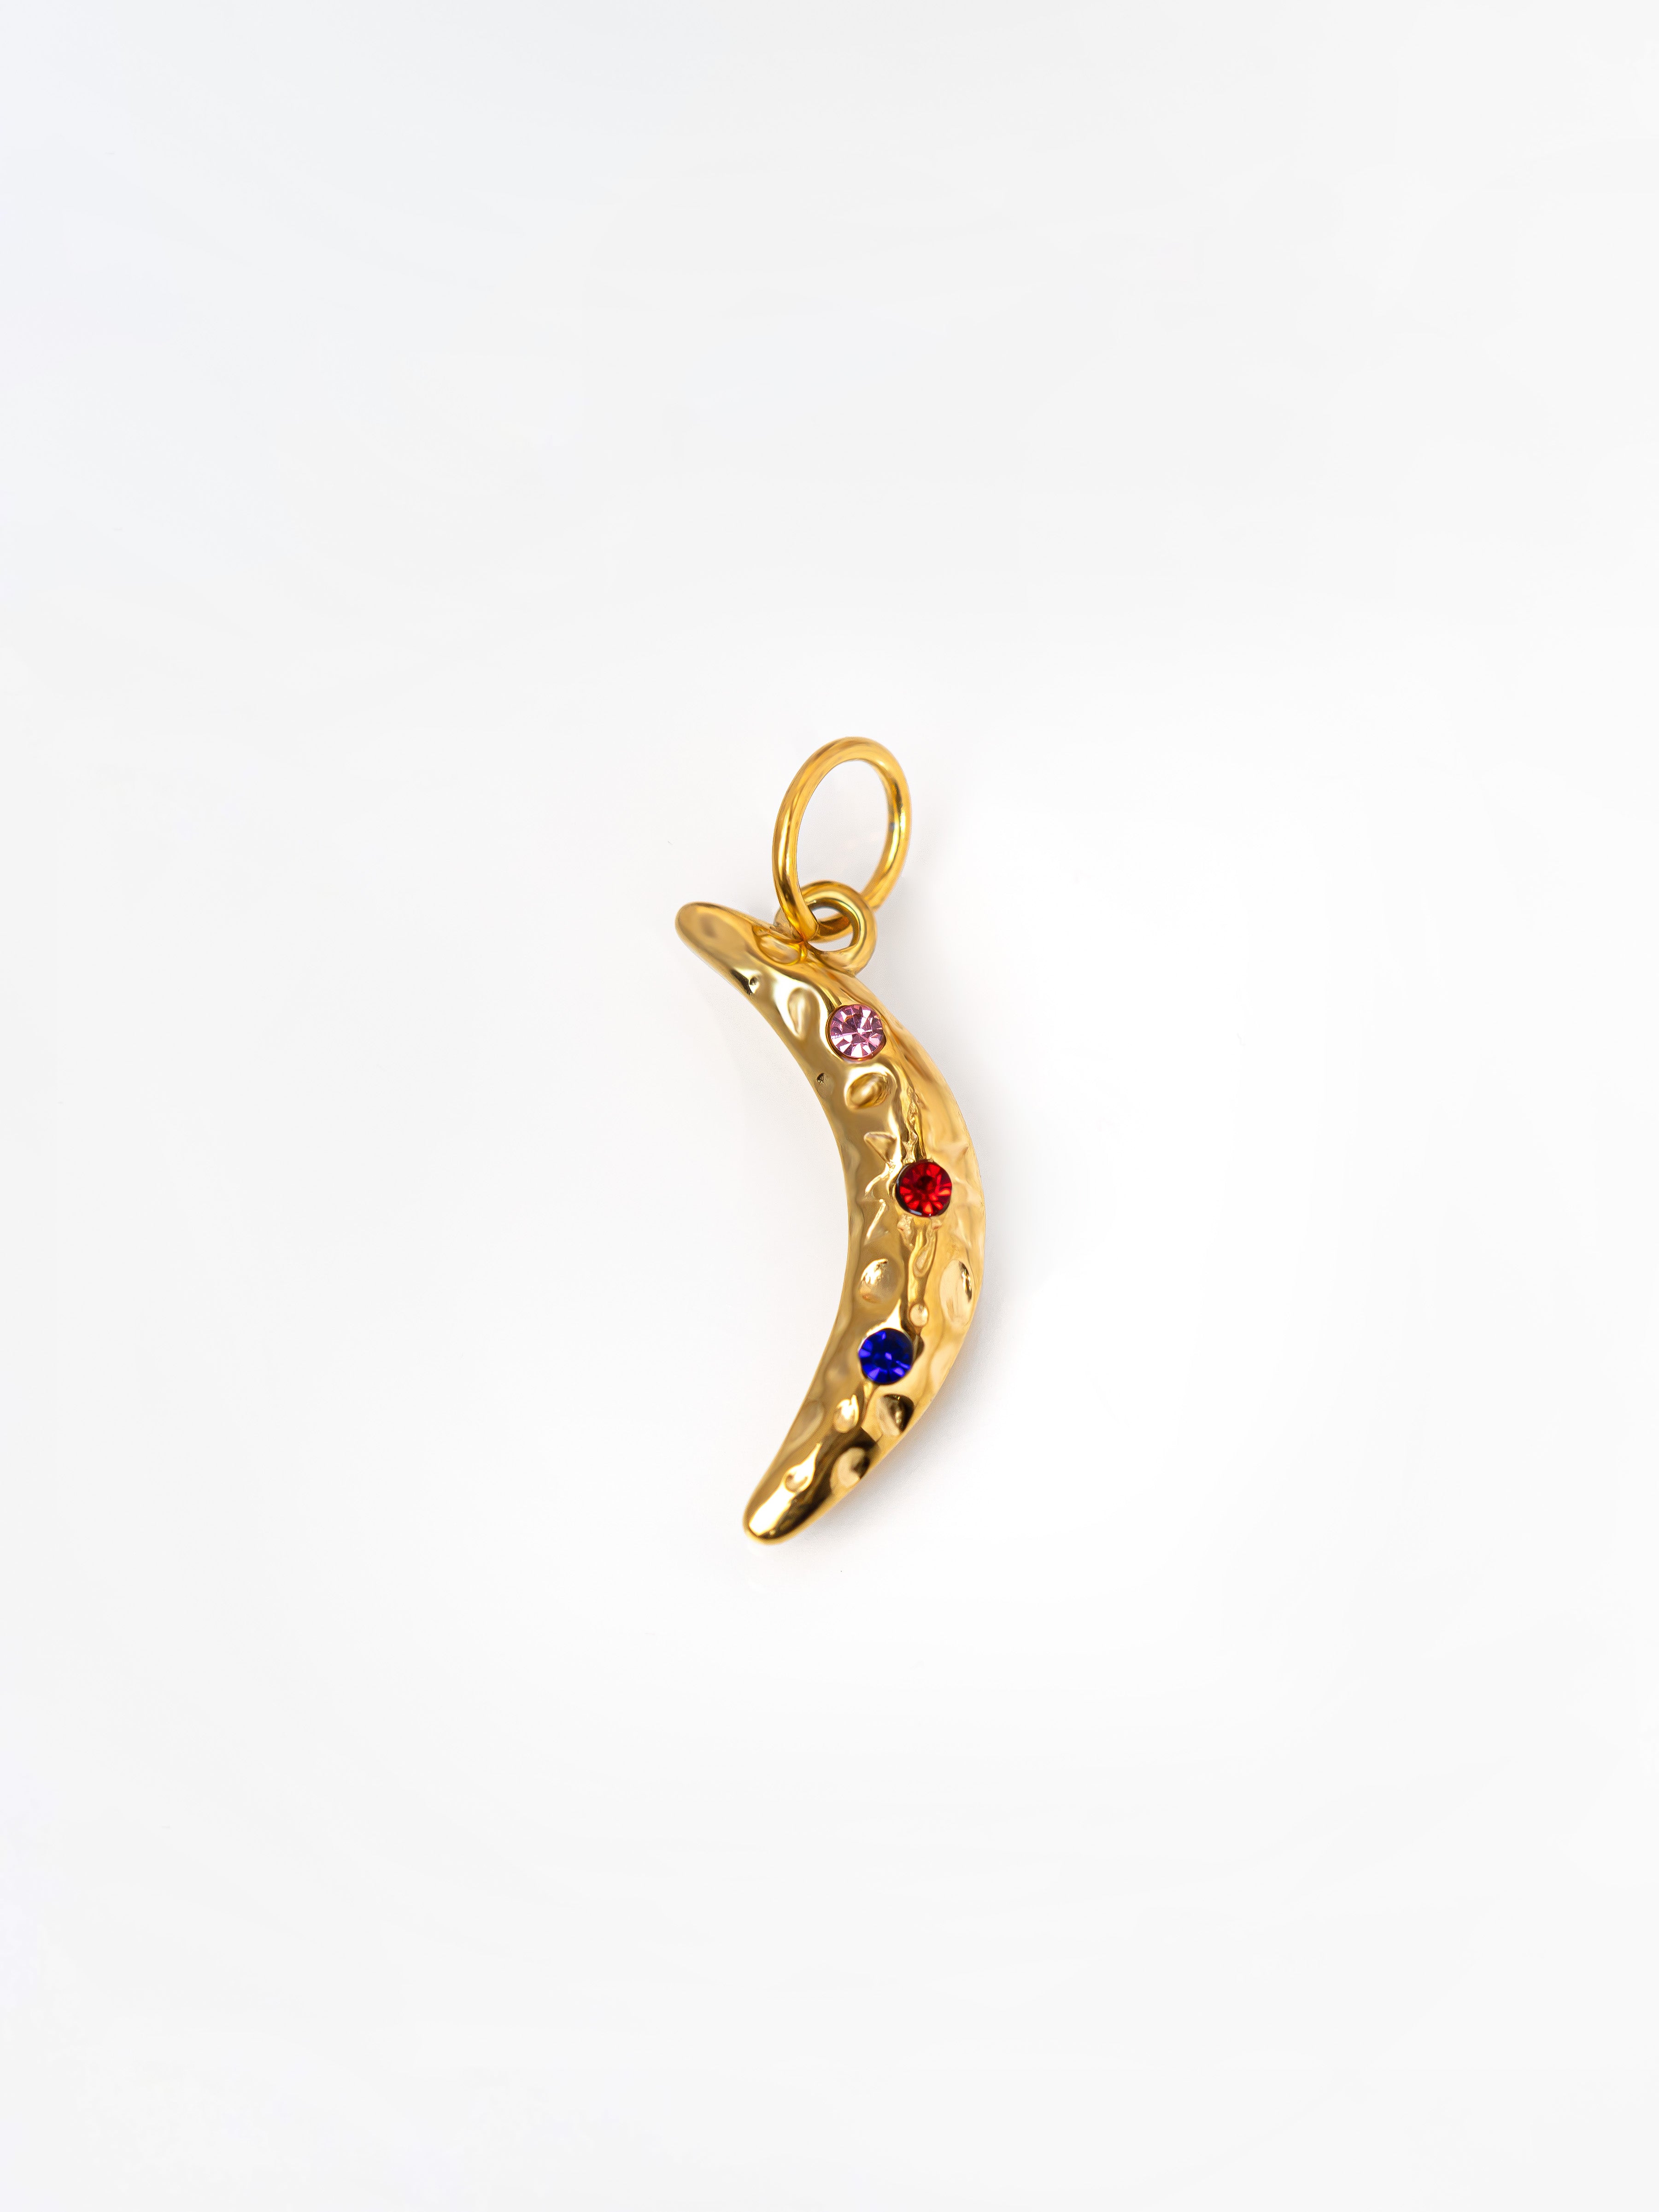 Gold Crescent Moon Pendant / Charm With Star & Colourful Stones